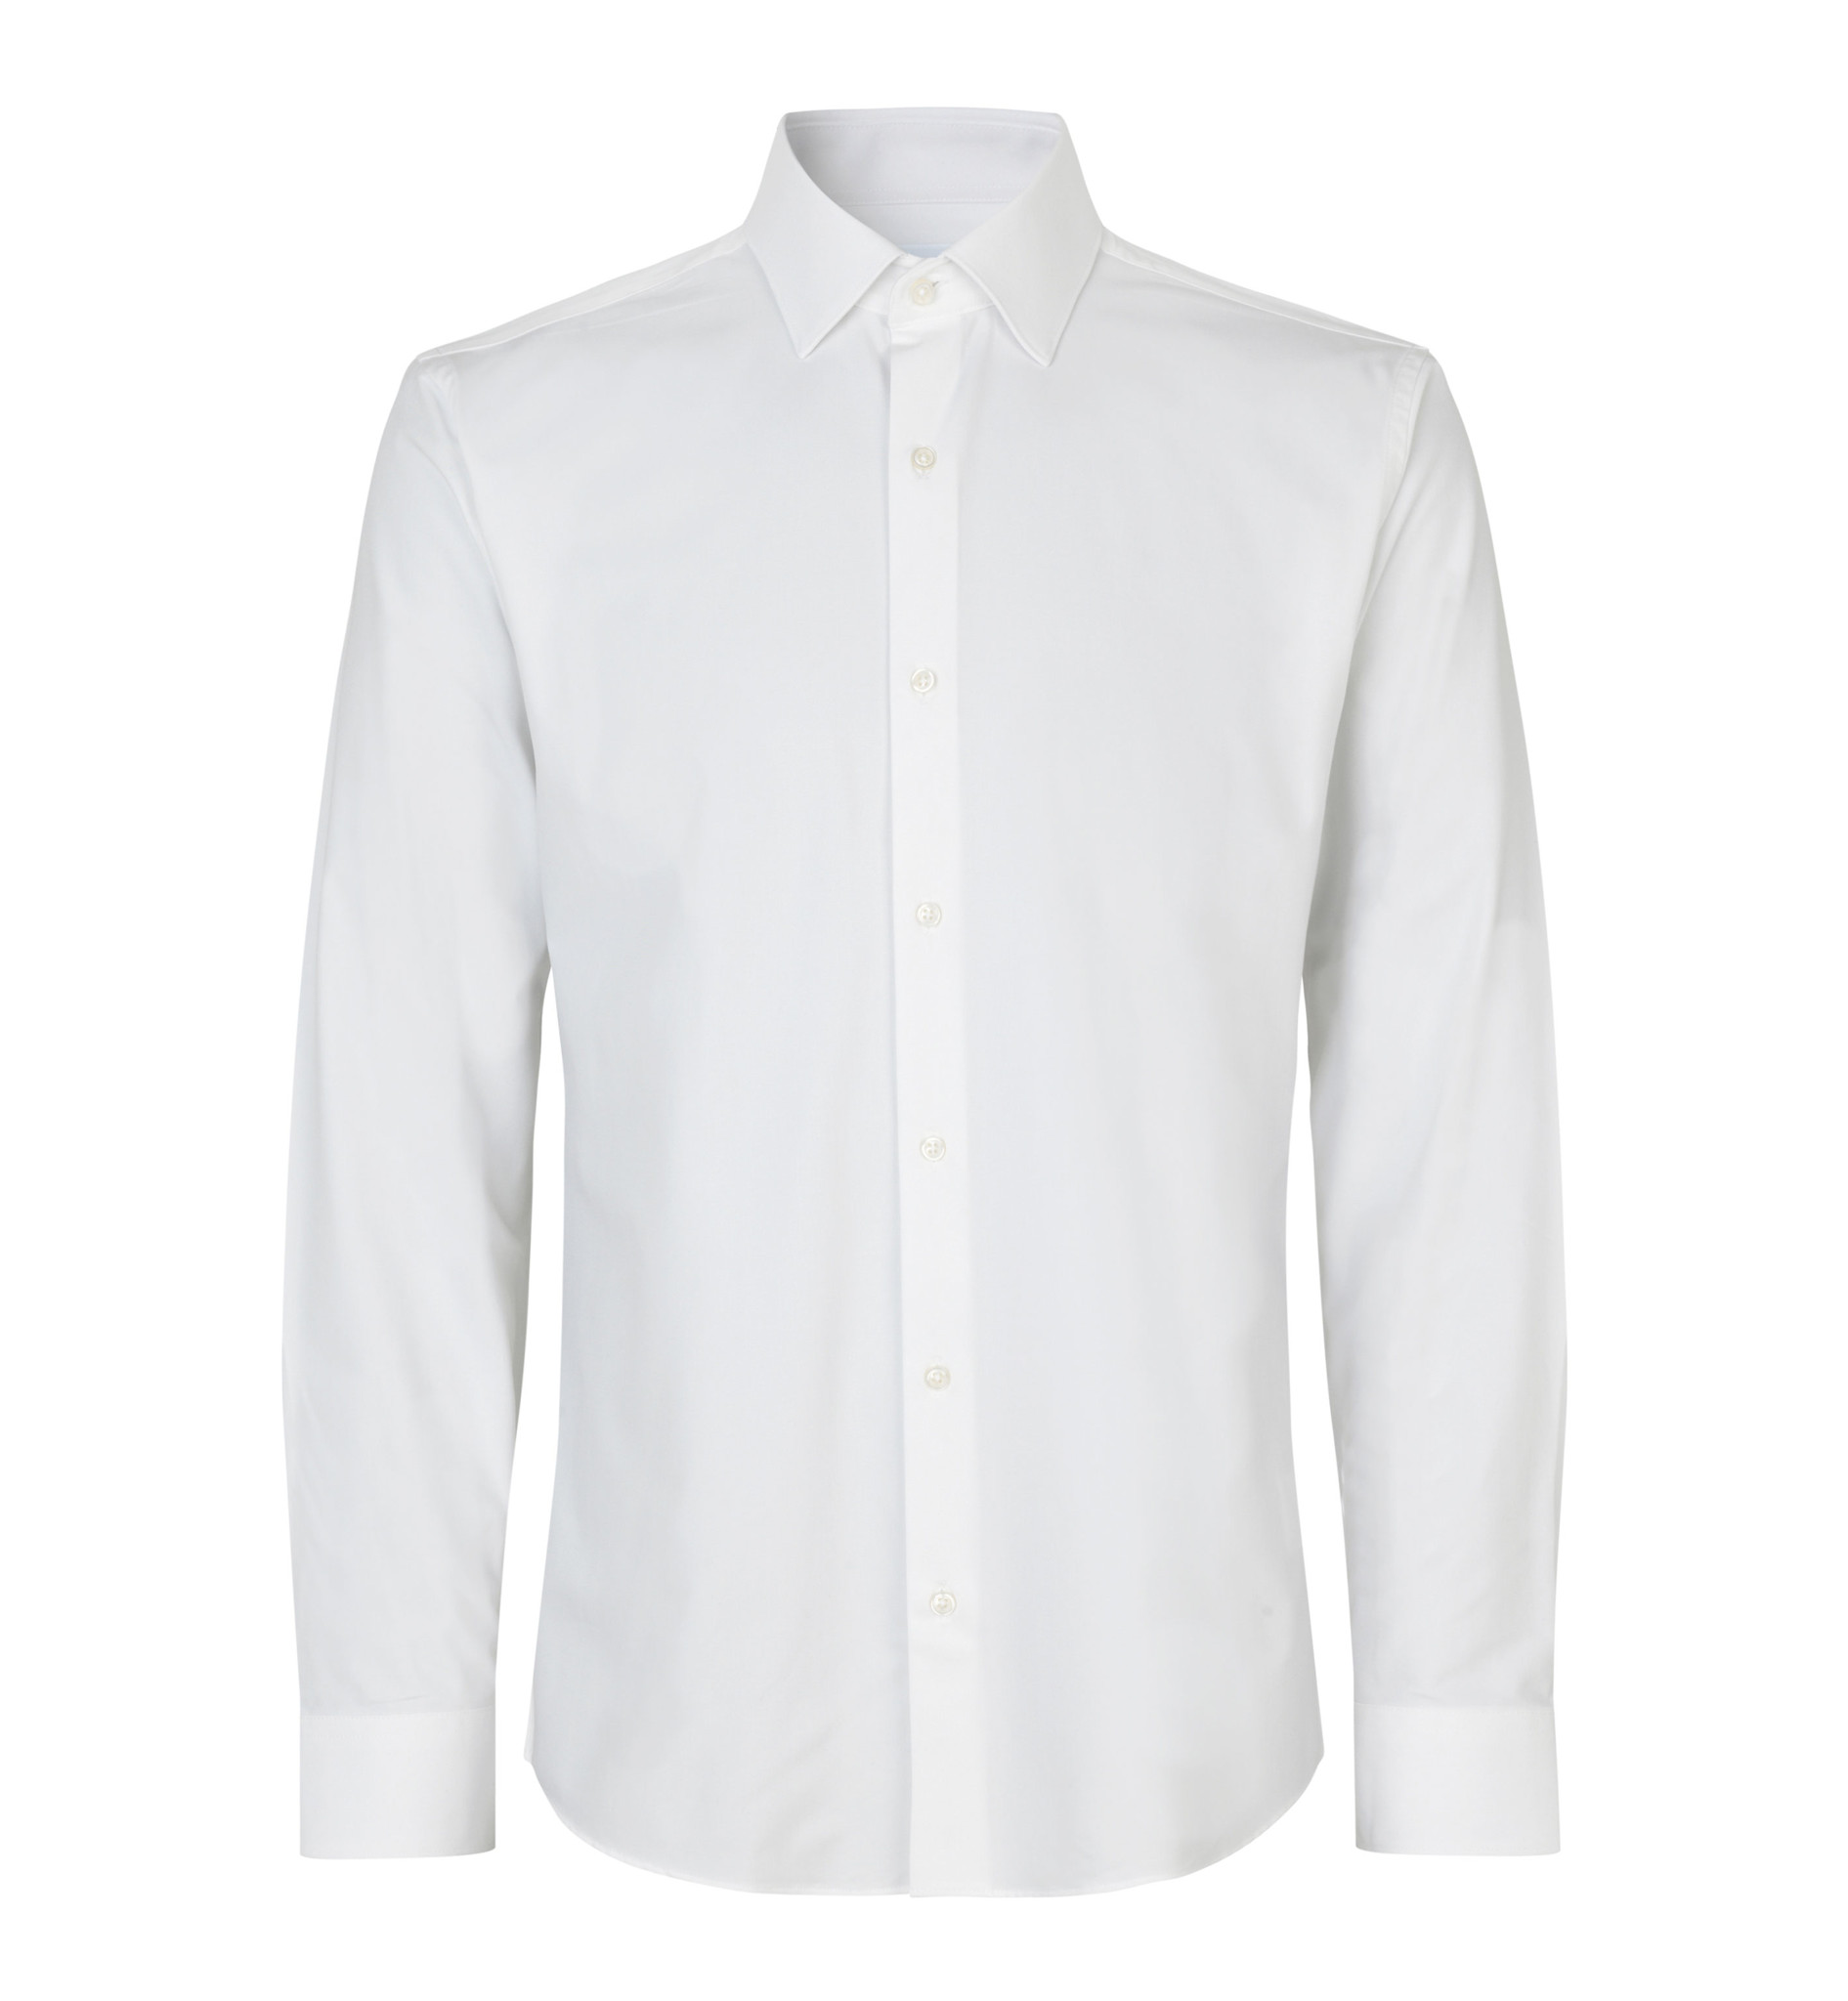 Picture of Hybrid men's shirt 